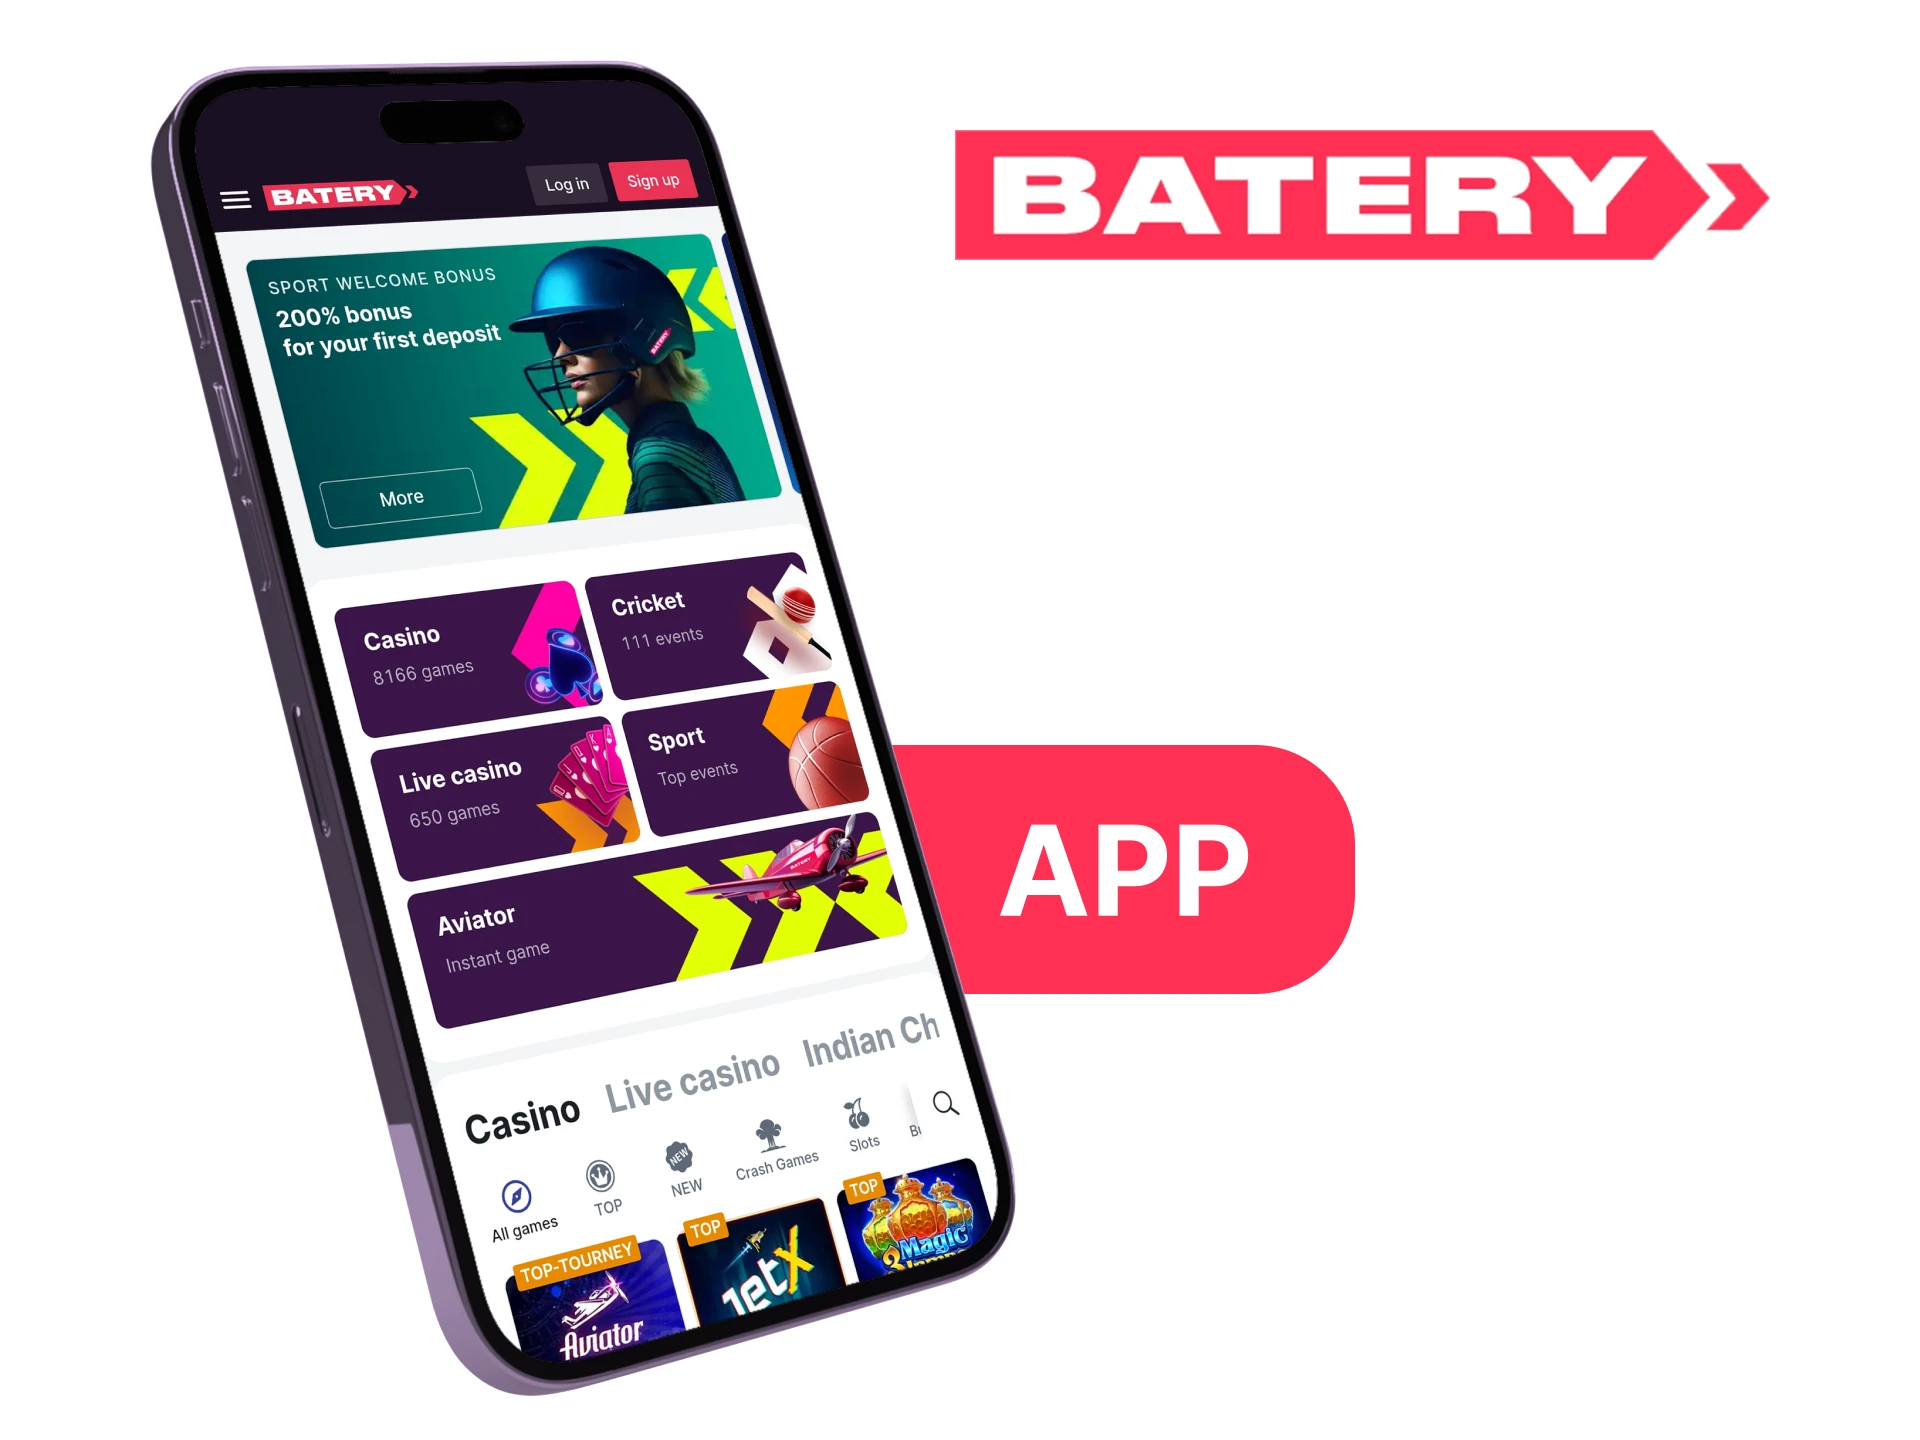 Batery has a mobile app for betting on cricket.